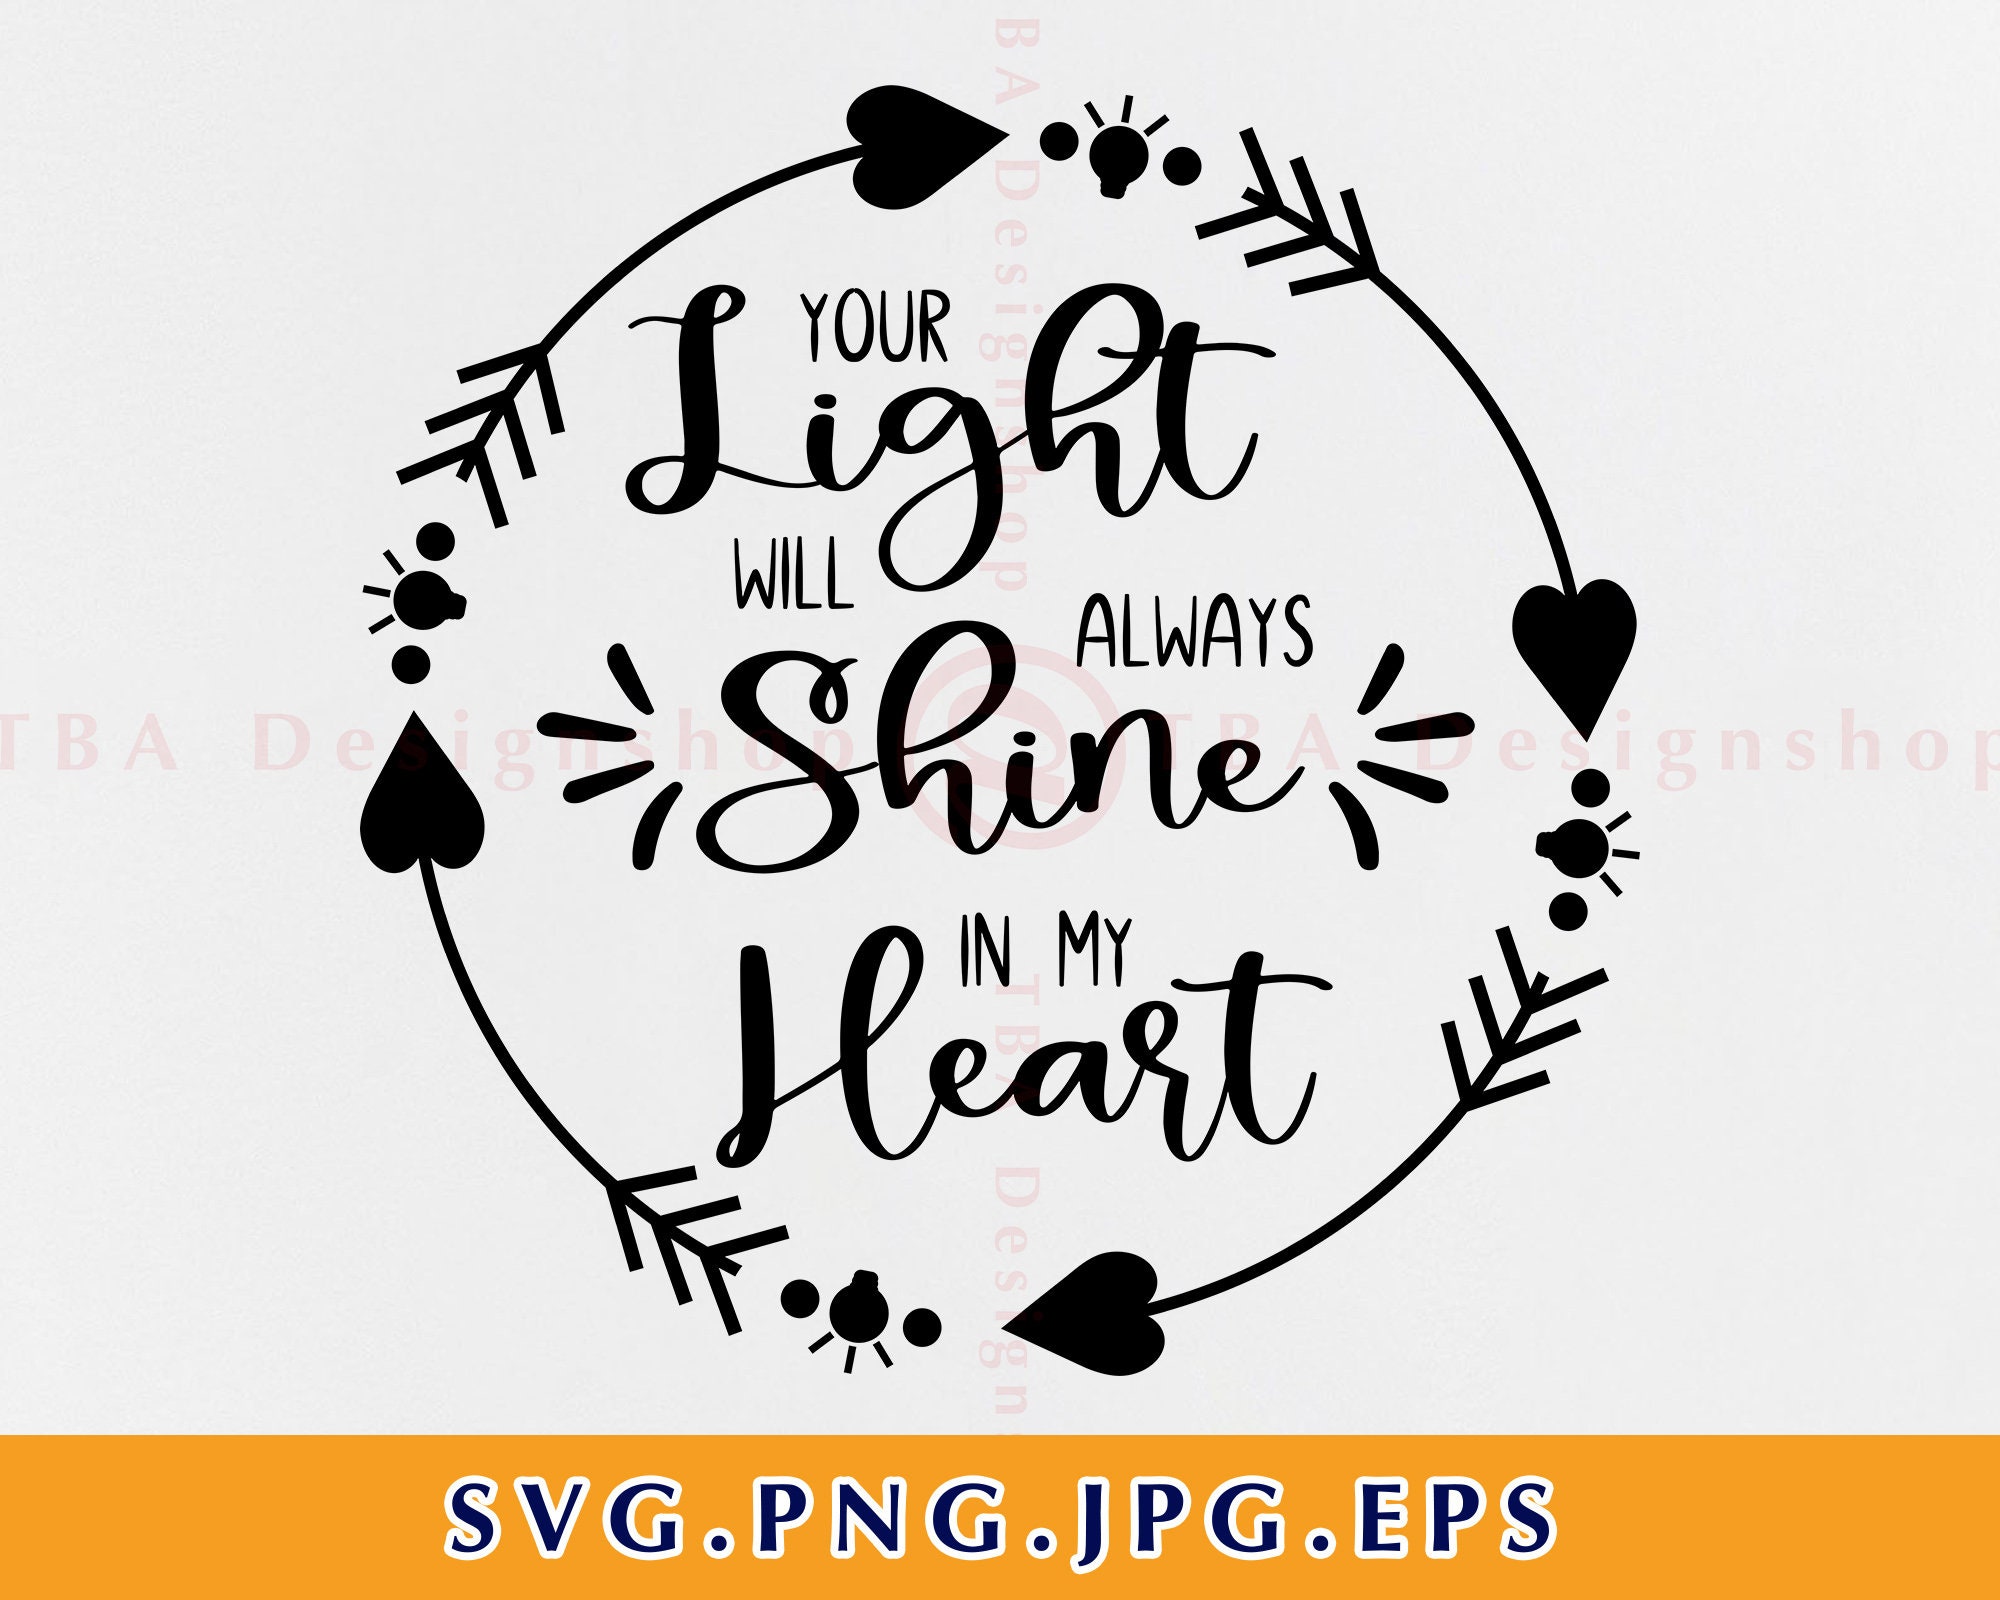 your light is so bright, shine on - Heartstrings Card Company, LLC.